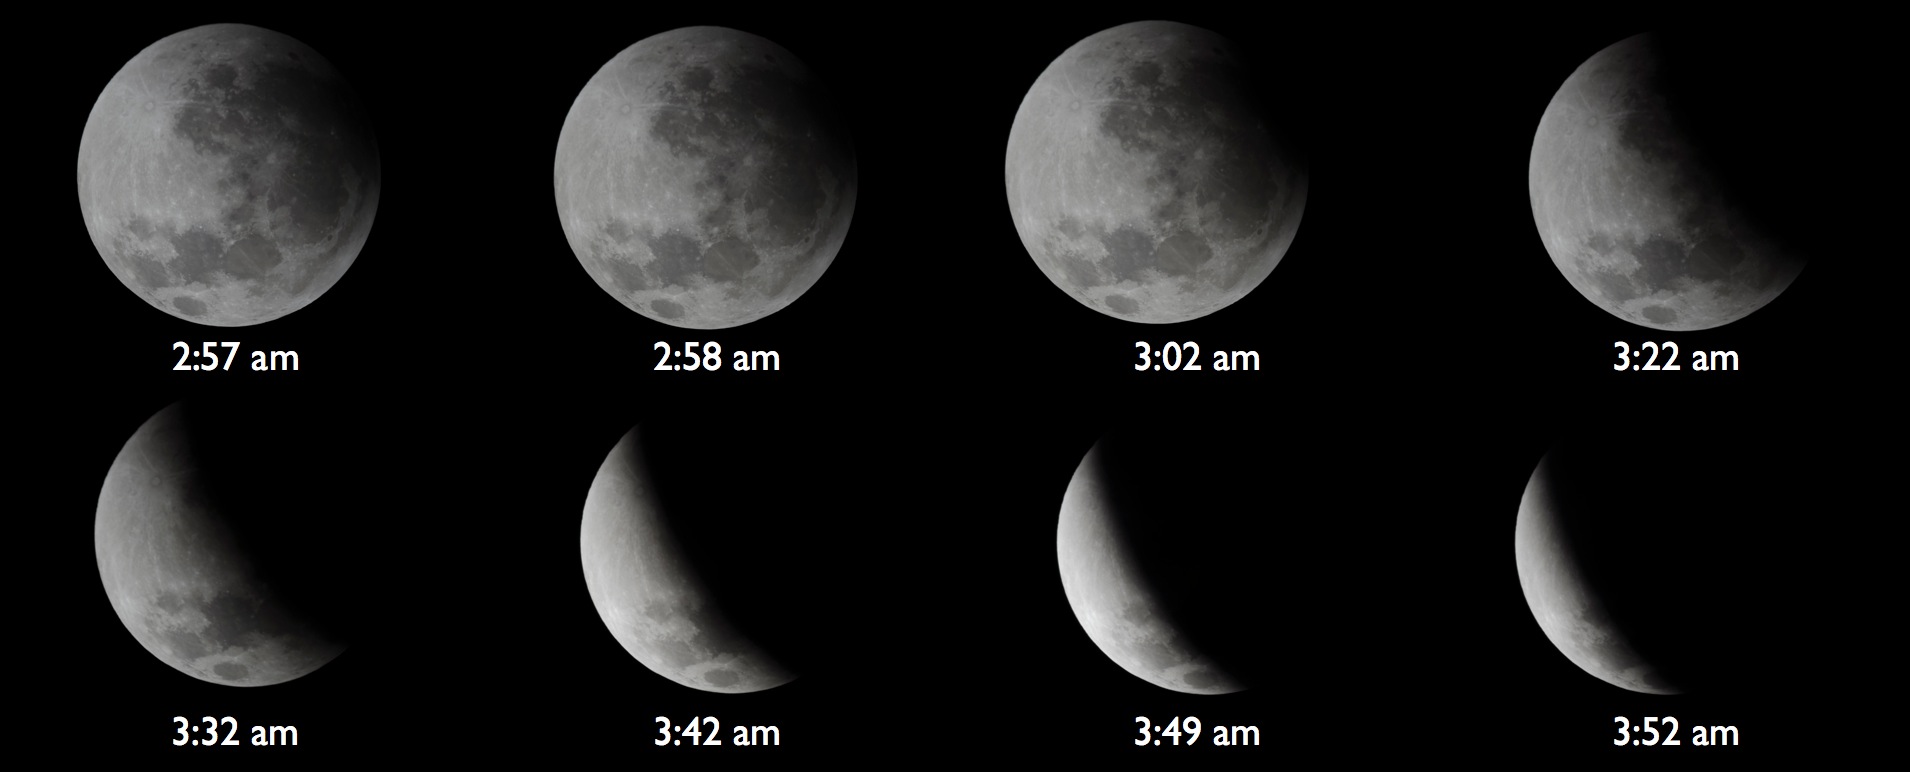 Daniel Munizaga (NOAO South/CTIO EPO), using the Cerro Tololo Inter-American Observatory, of an eight-image sequence of the partial phase of a total lunar eclipse.